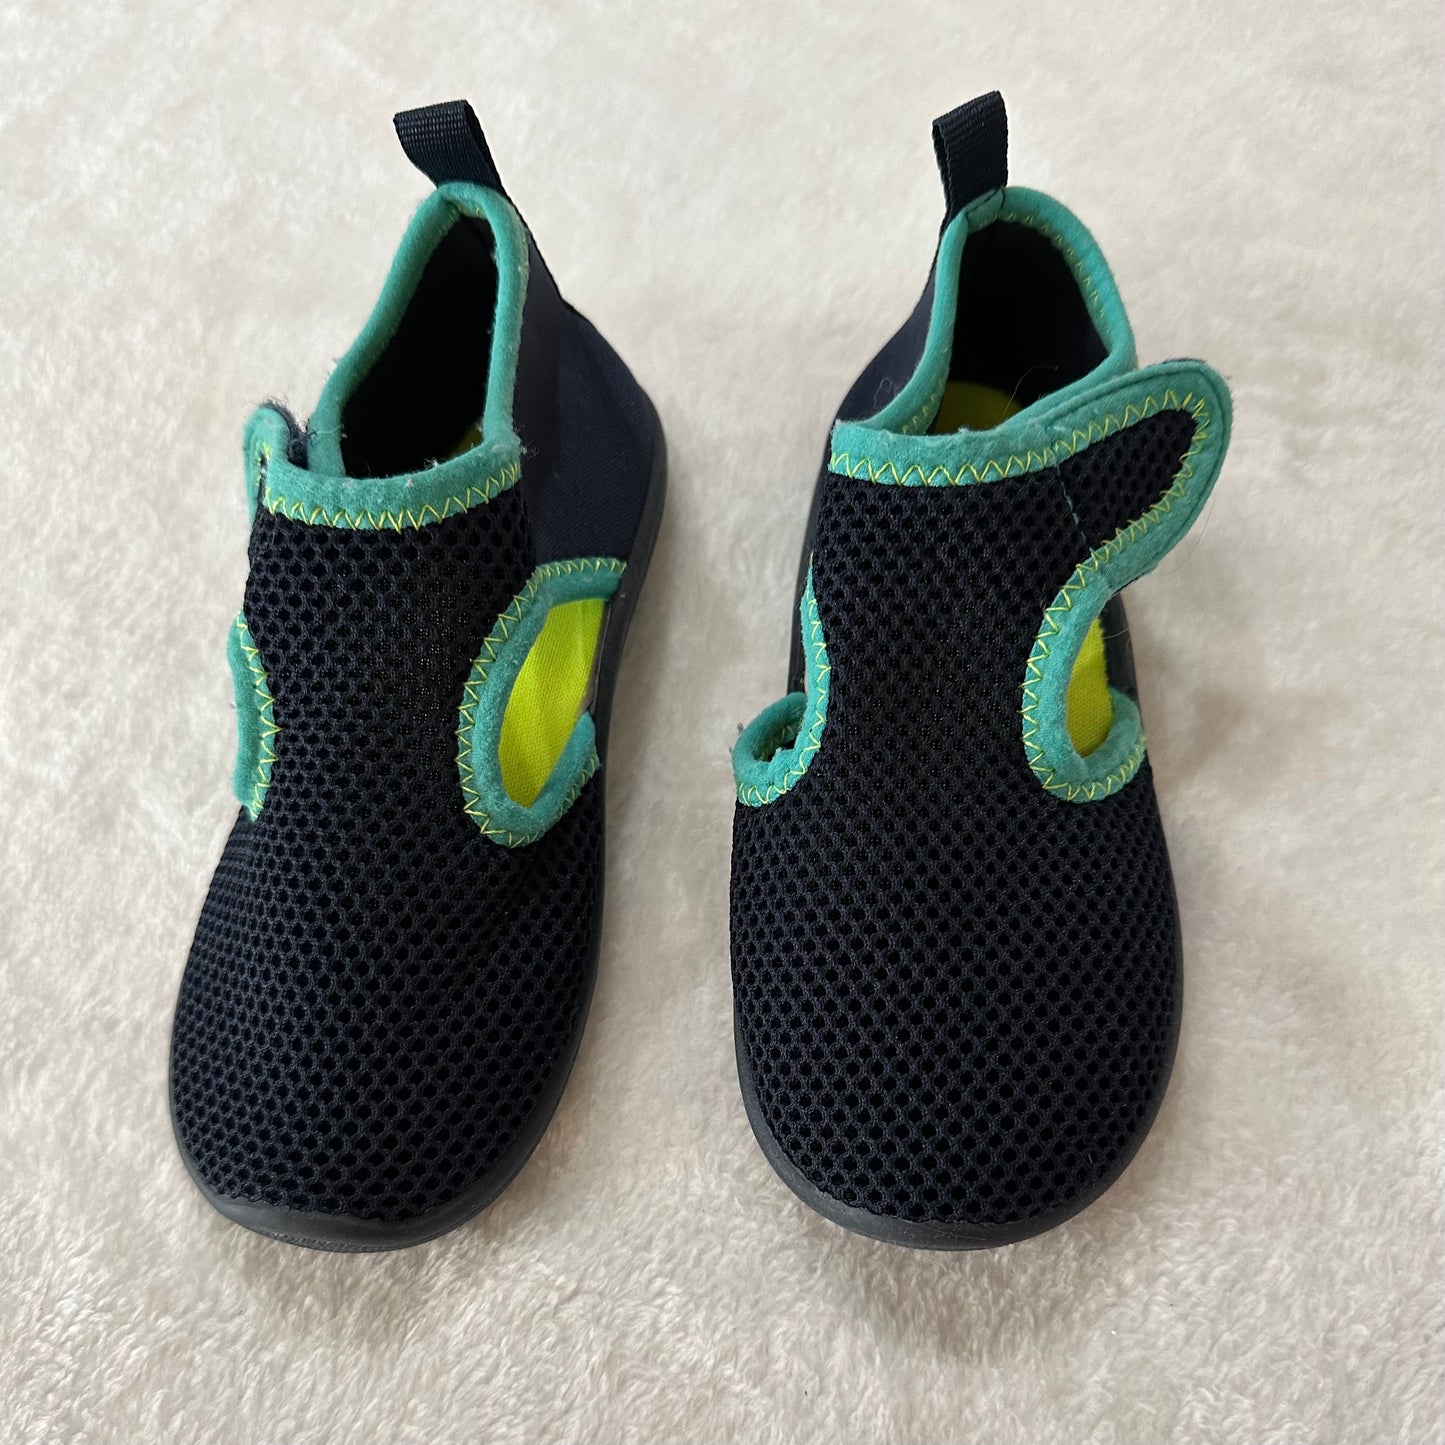 Boys Old Navy water shoes size 9